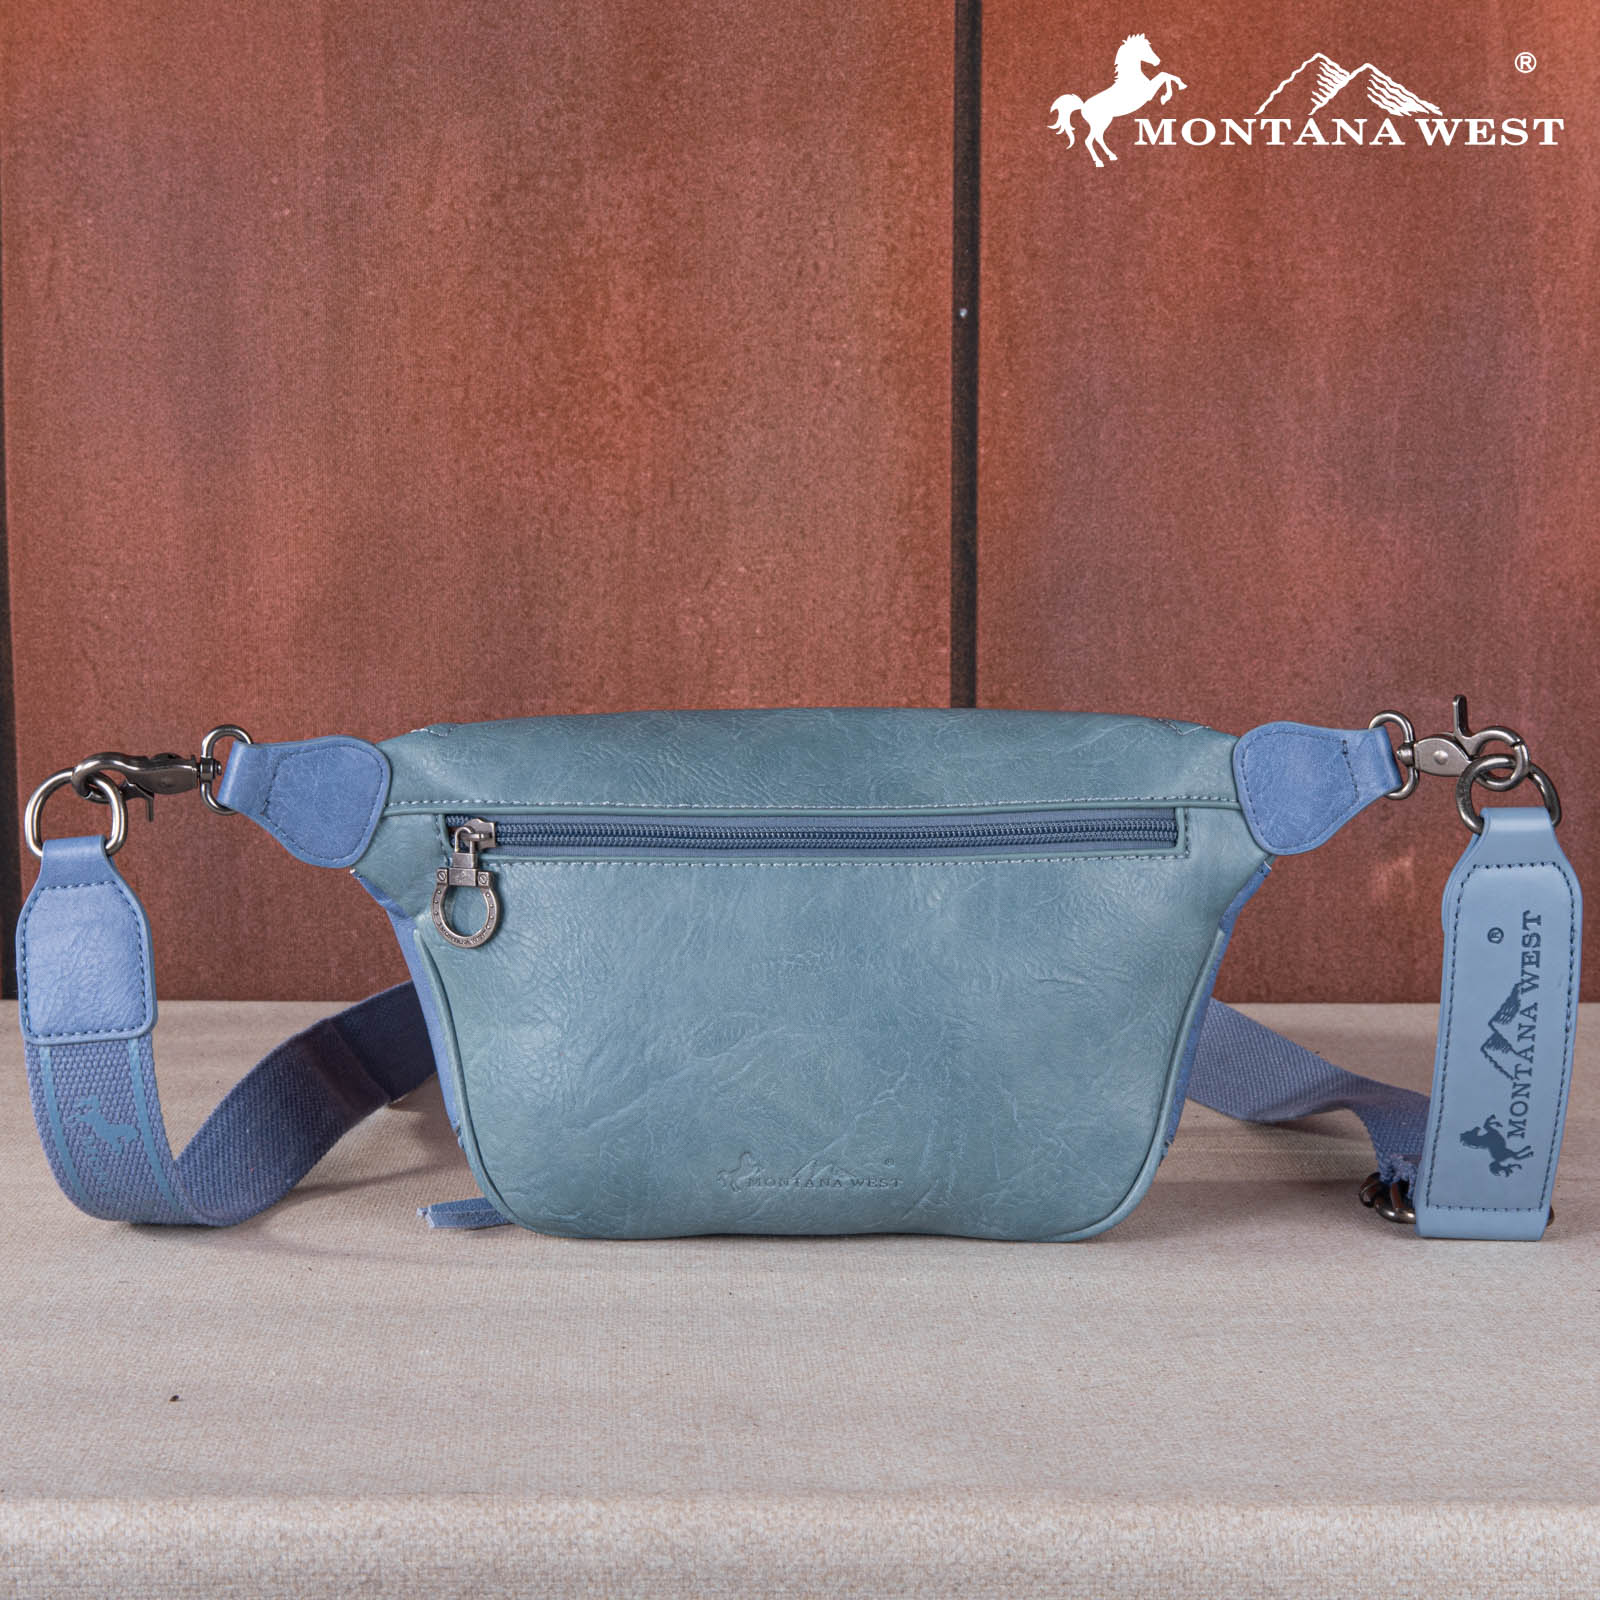 Montana West Studded Whipstitch Fanny Pack